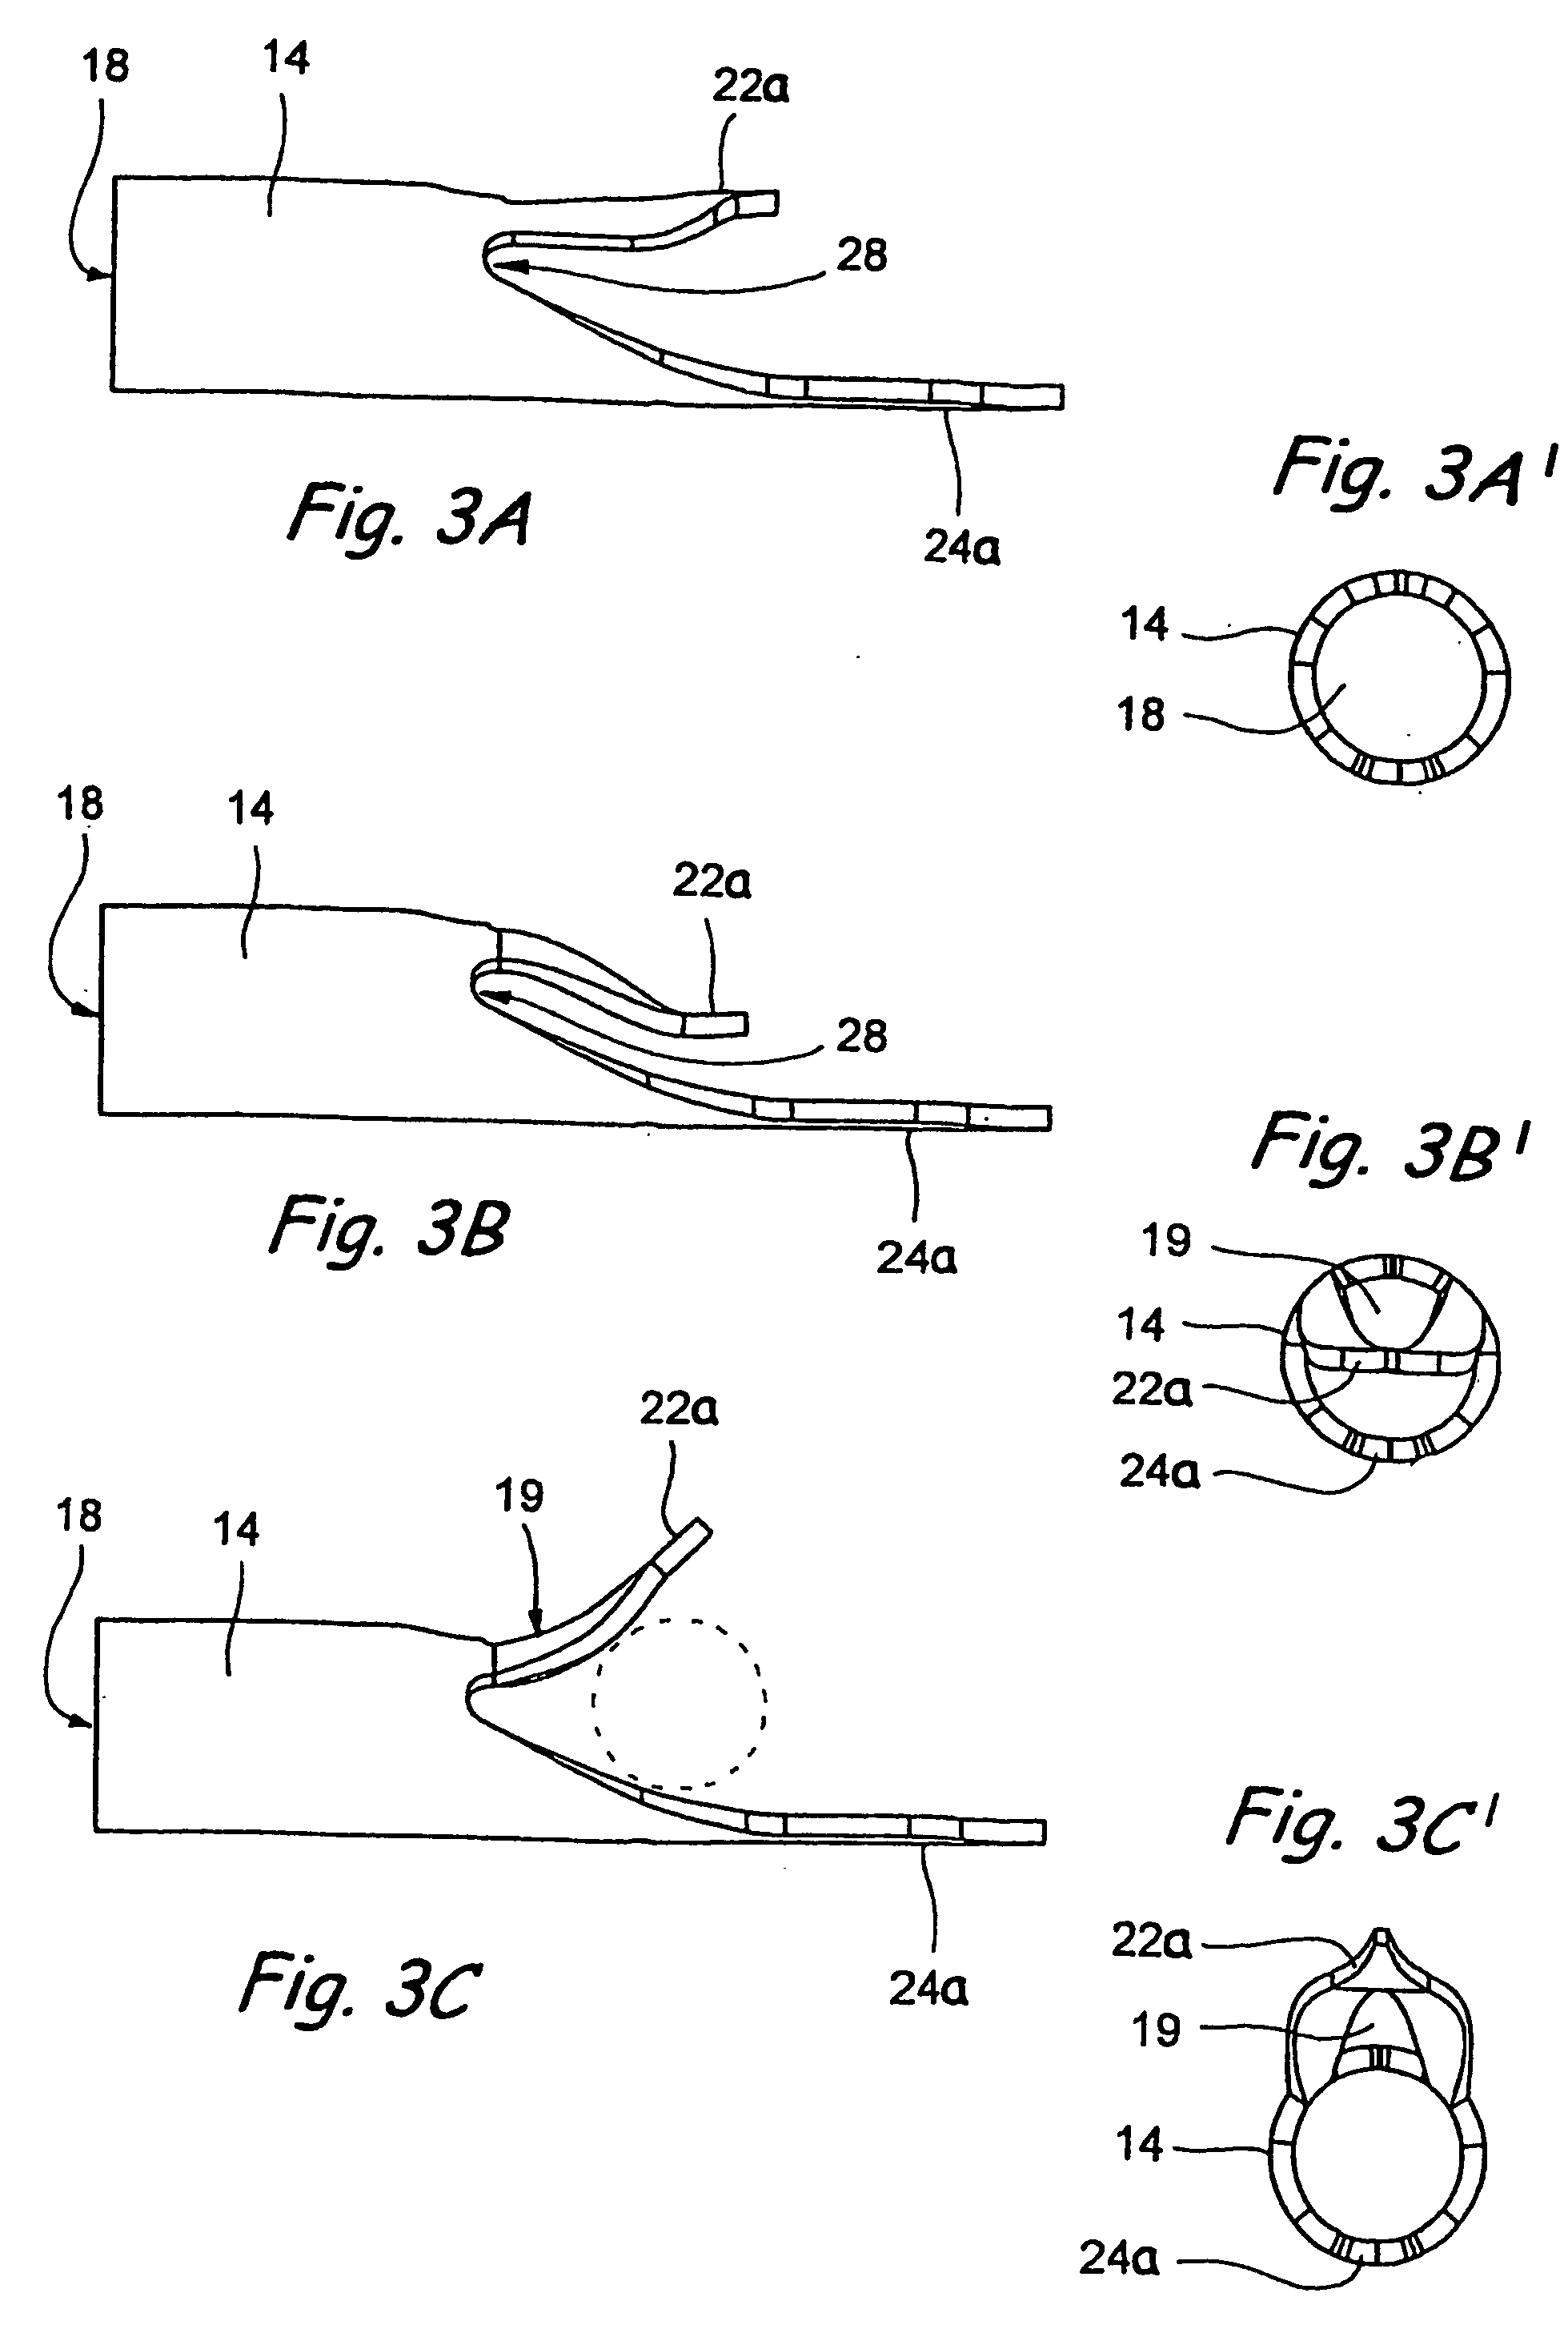 Device and methods useable for treatment of glaucoma and other surgical procedures